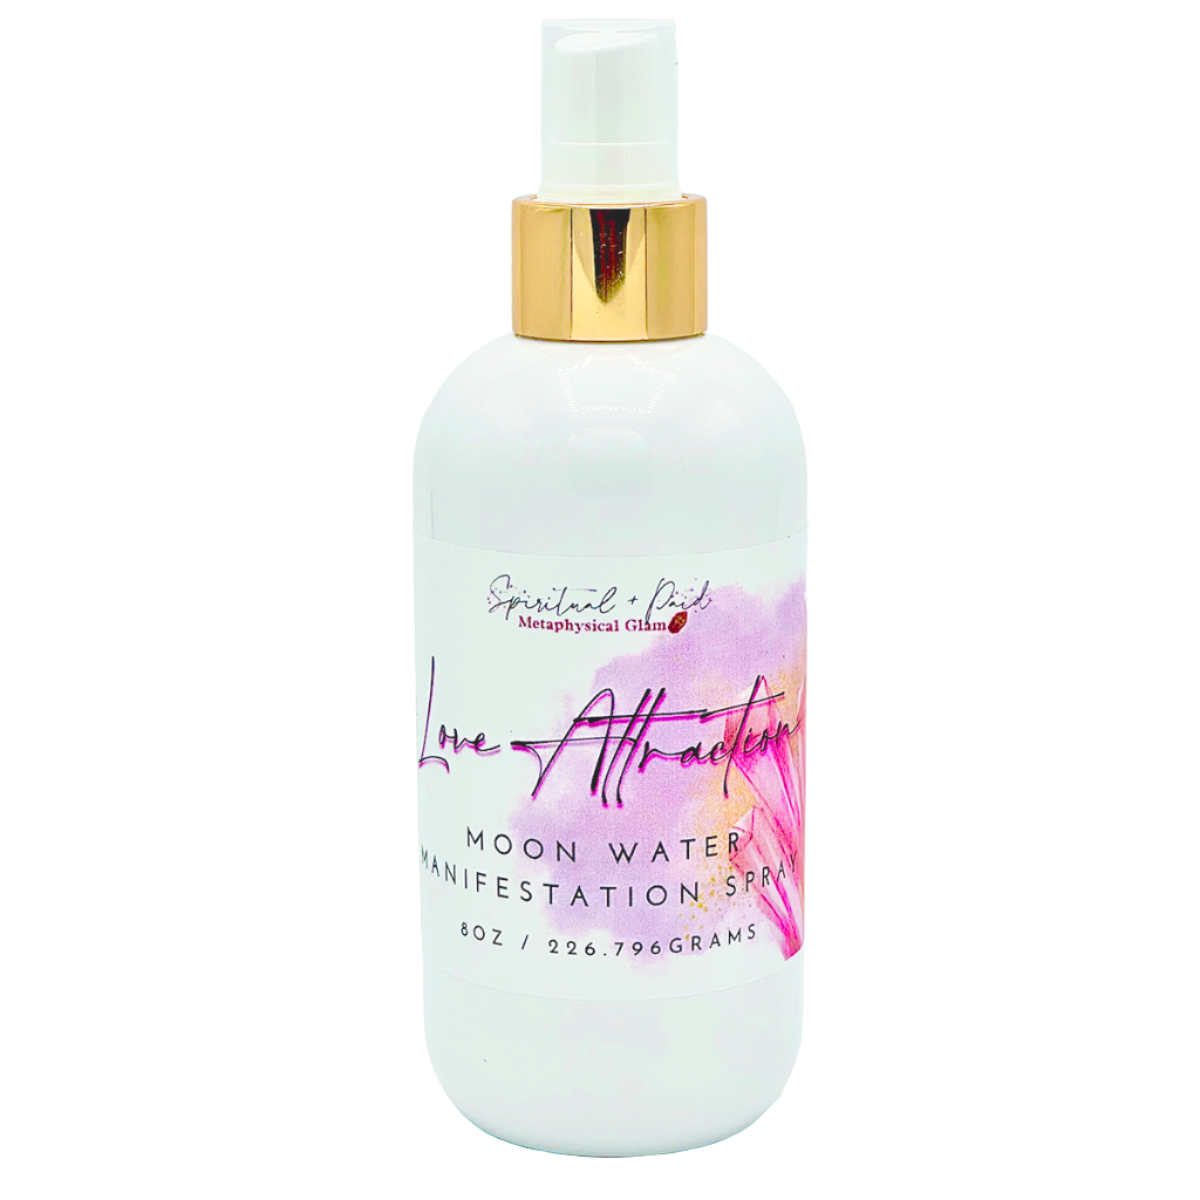 Love Attraction Moon Water Manifestation Spray ~ Self Love, Bonding With Others, & Attraction